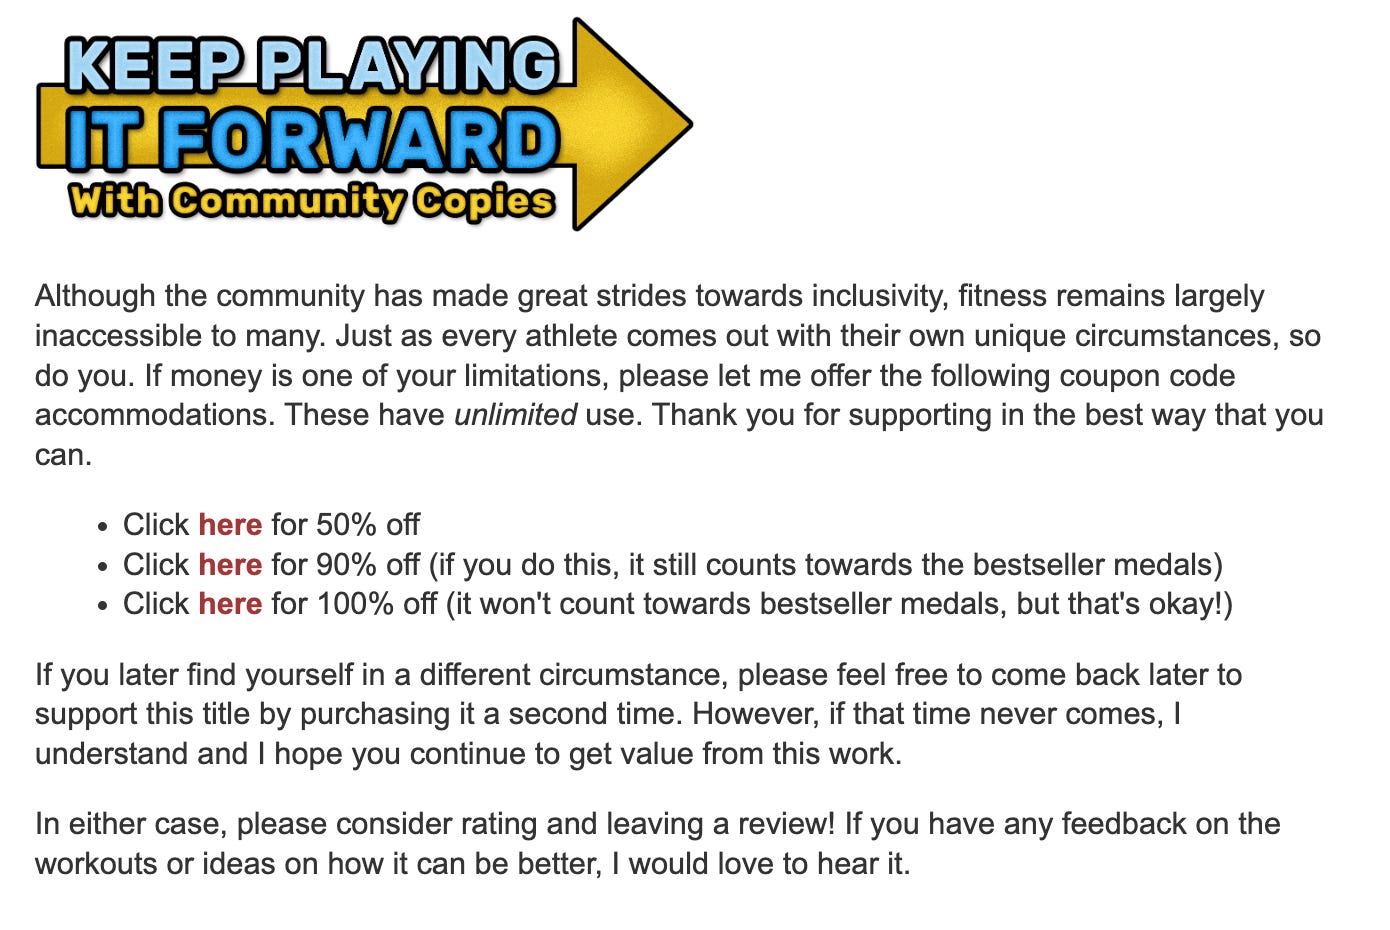 A screen capture that reads: Although the community has made great strides towards inclusivity, fitness remains largely inaccessible to many. Just as every athlete comes out with their own unique circumstances, so do you. If money is one of your limitations, please let me offer the following coupon code accommodations. These have unlimited use. Thank you for supporting in the best way that you can.  Click here for 50% off Click here for 90% off (if you do this, it still counts towards the bestseller medals) Click here for 100% off (it won't count towards bestseller medals, but that's okay!) If you later find yourself in a different circumstance, please feel free to come back later to support this title by purchasing it a second time. However, if that time never comes, I understand and I hope you continue to get value from this work.